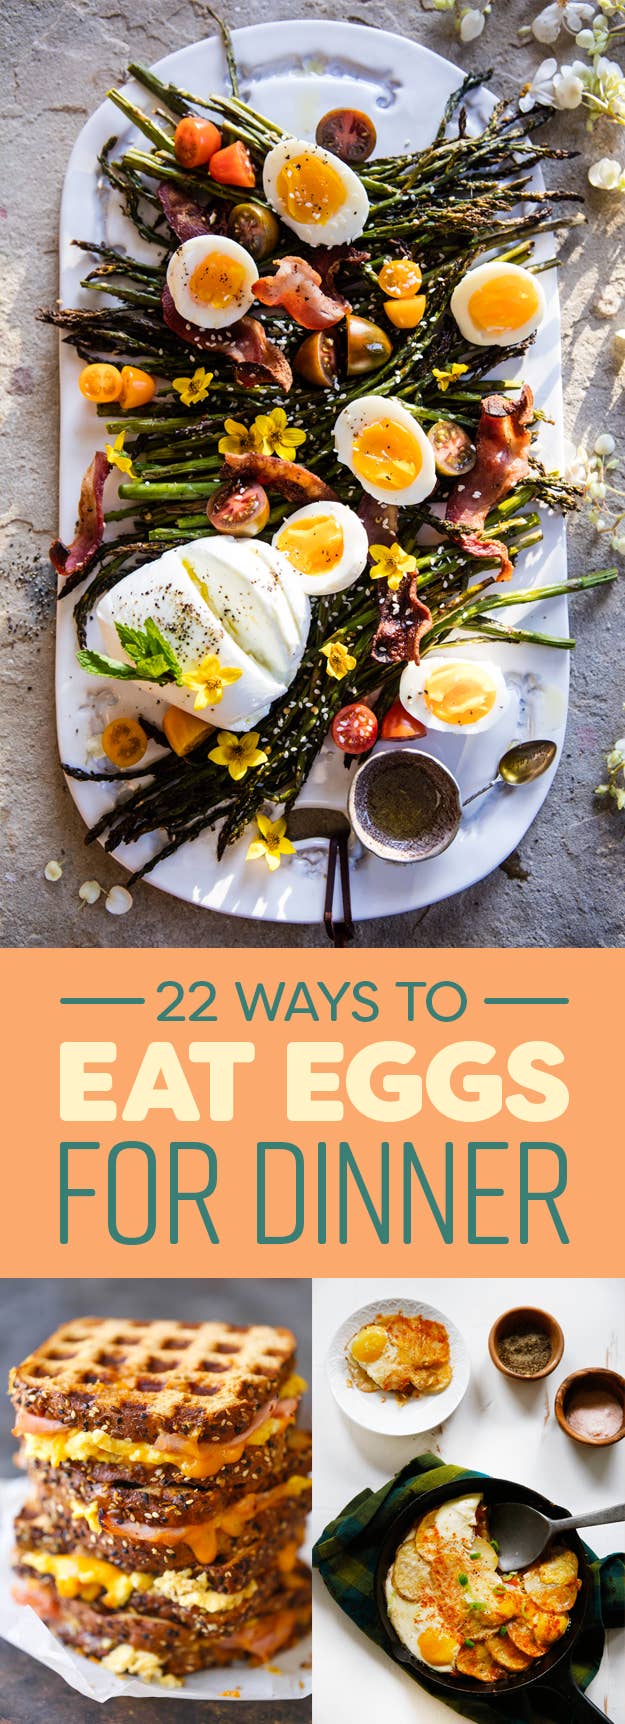 Everyday Cooking: Eggs for Dinner